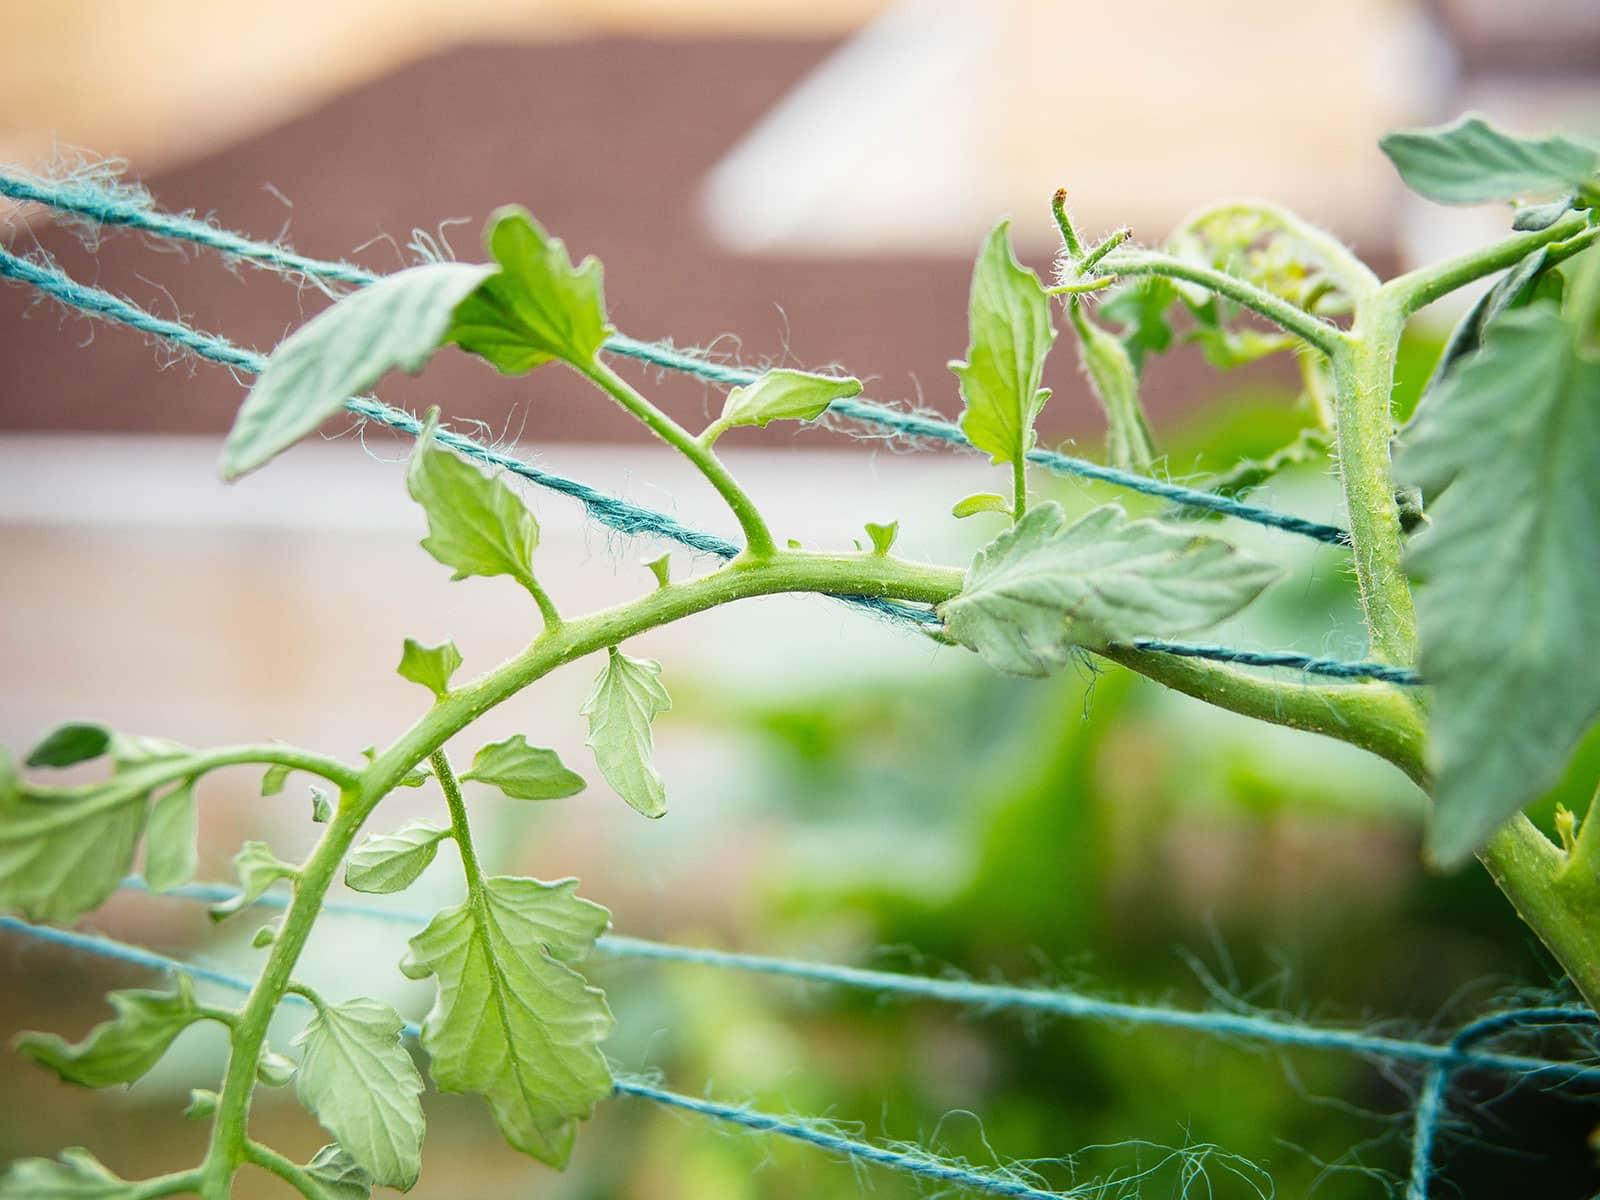 Close-up of green cord holding up a tomato vine